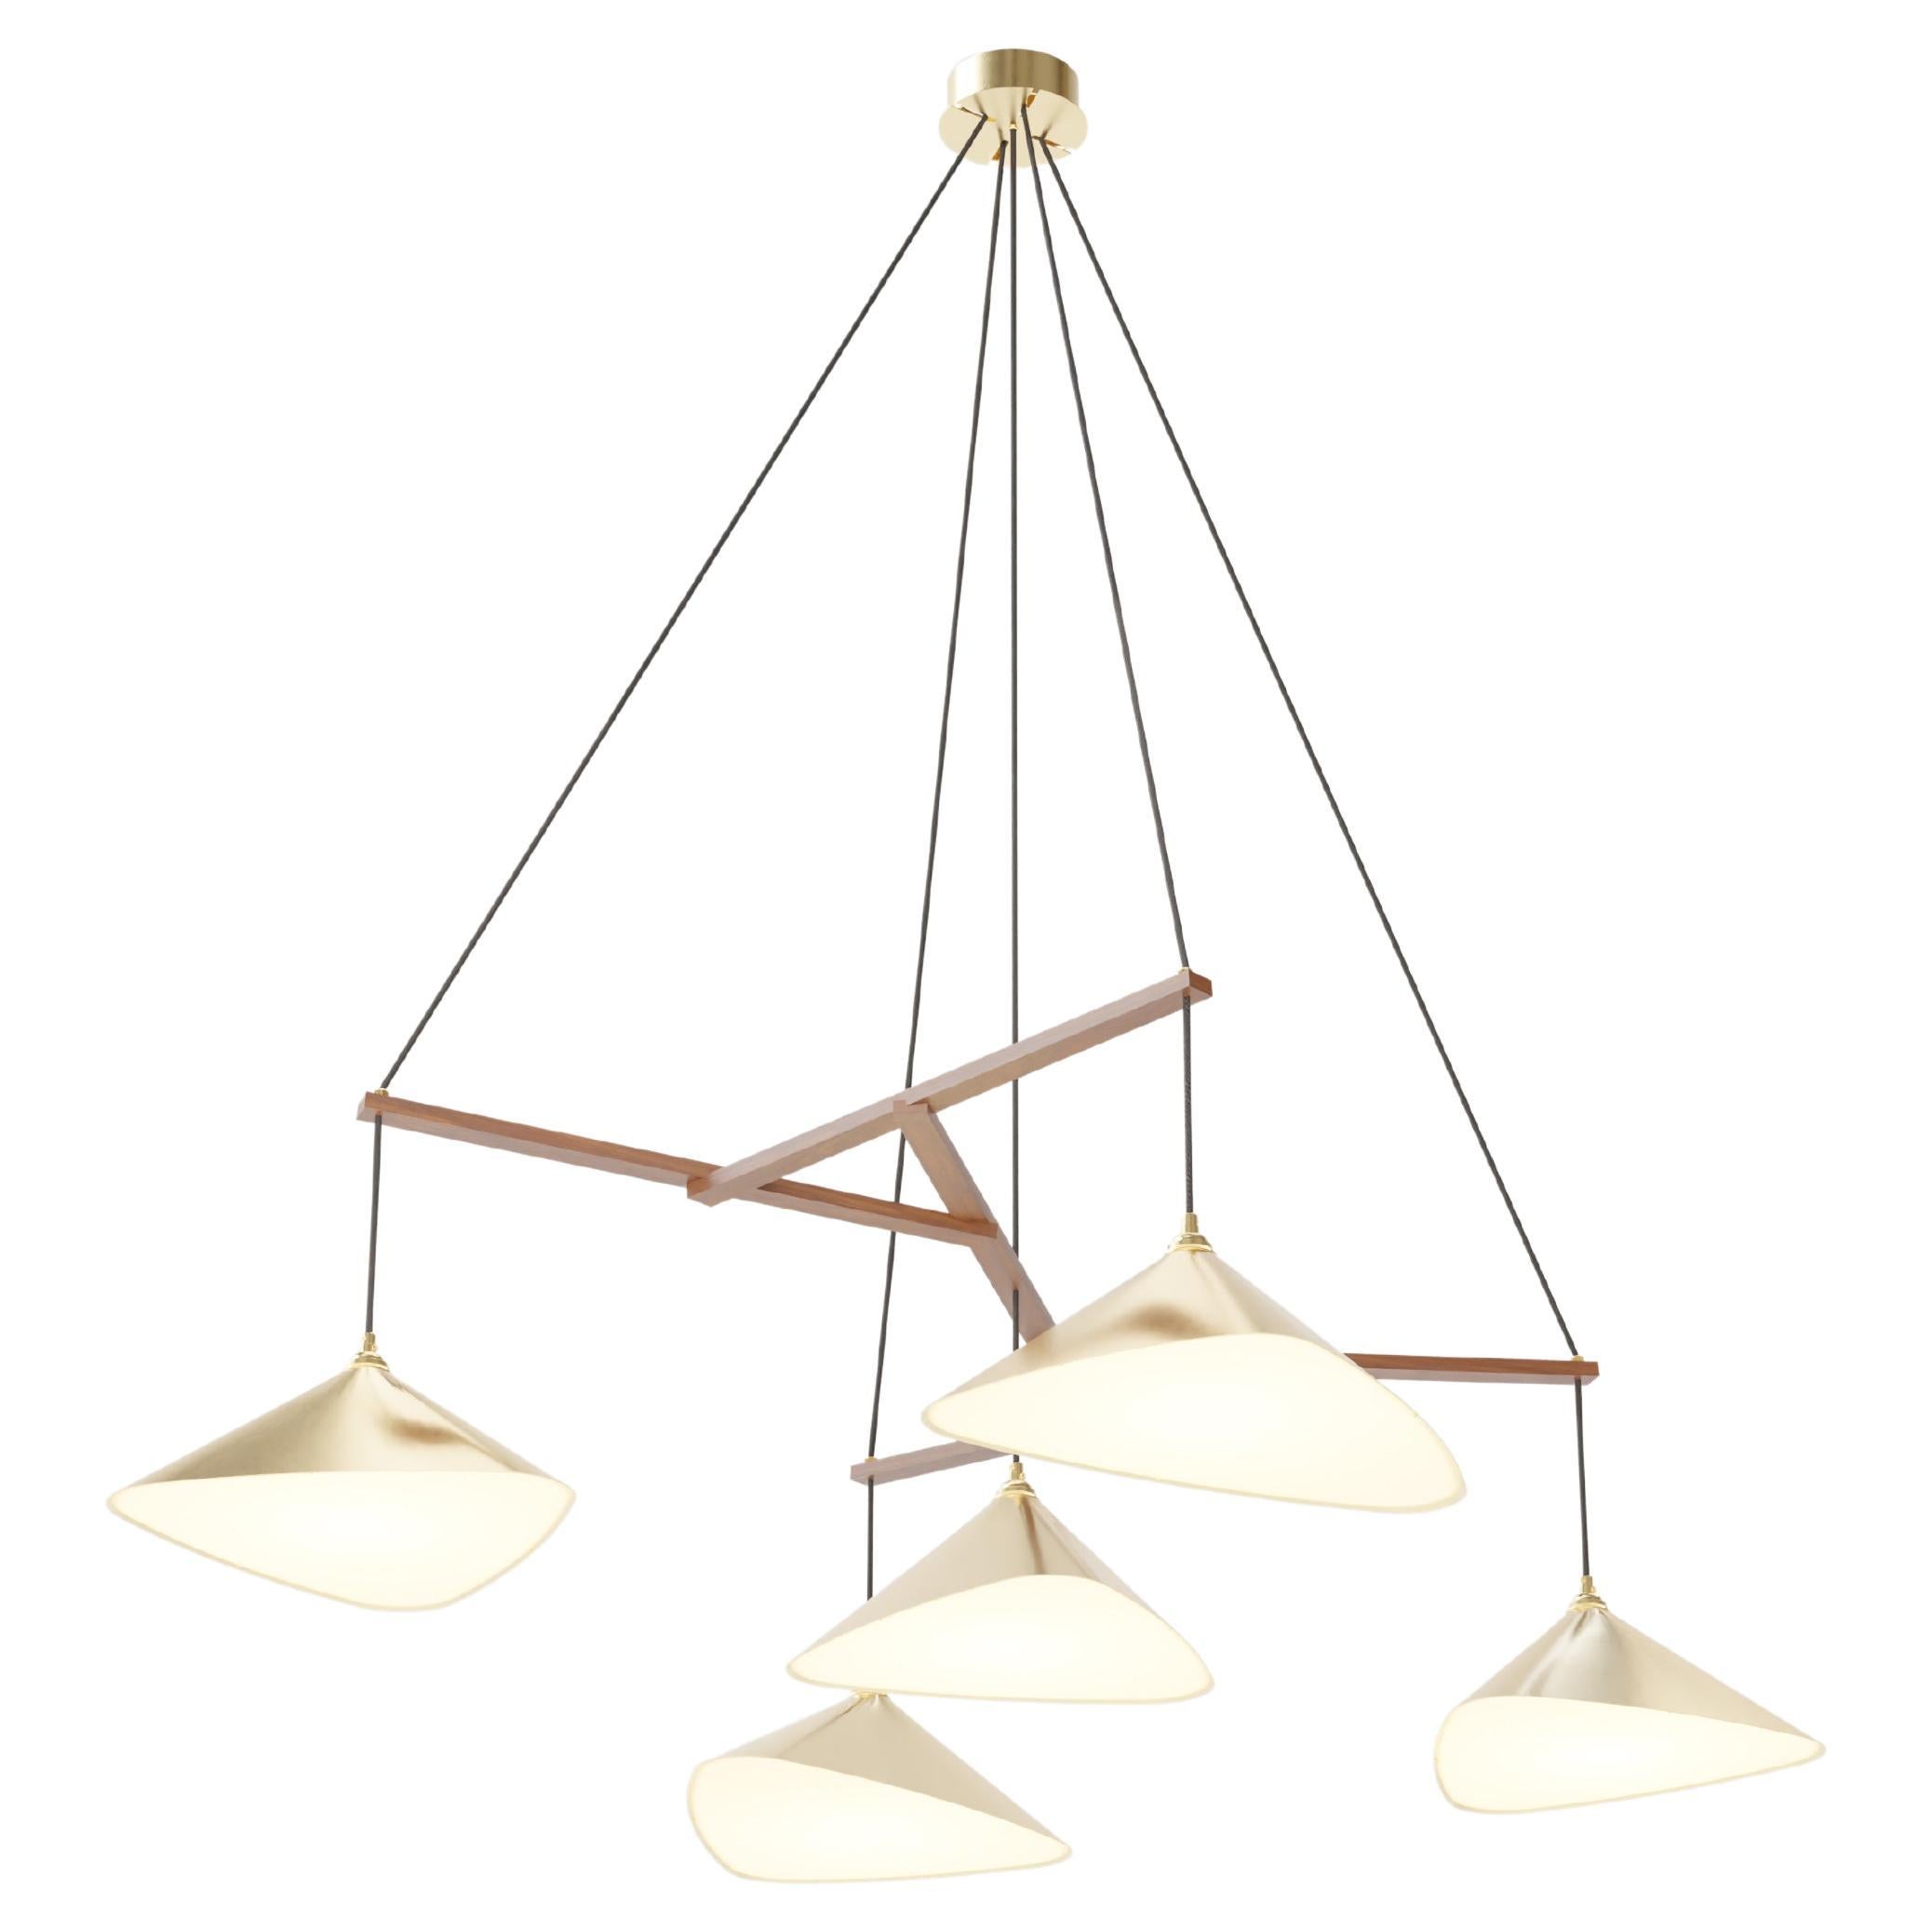 Large Daniel Becker 'Emily 5' Chandelier in Brass and Oak Frame for Moss Objects For Sale